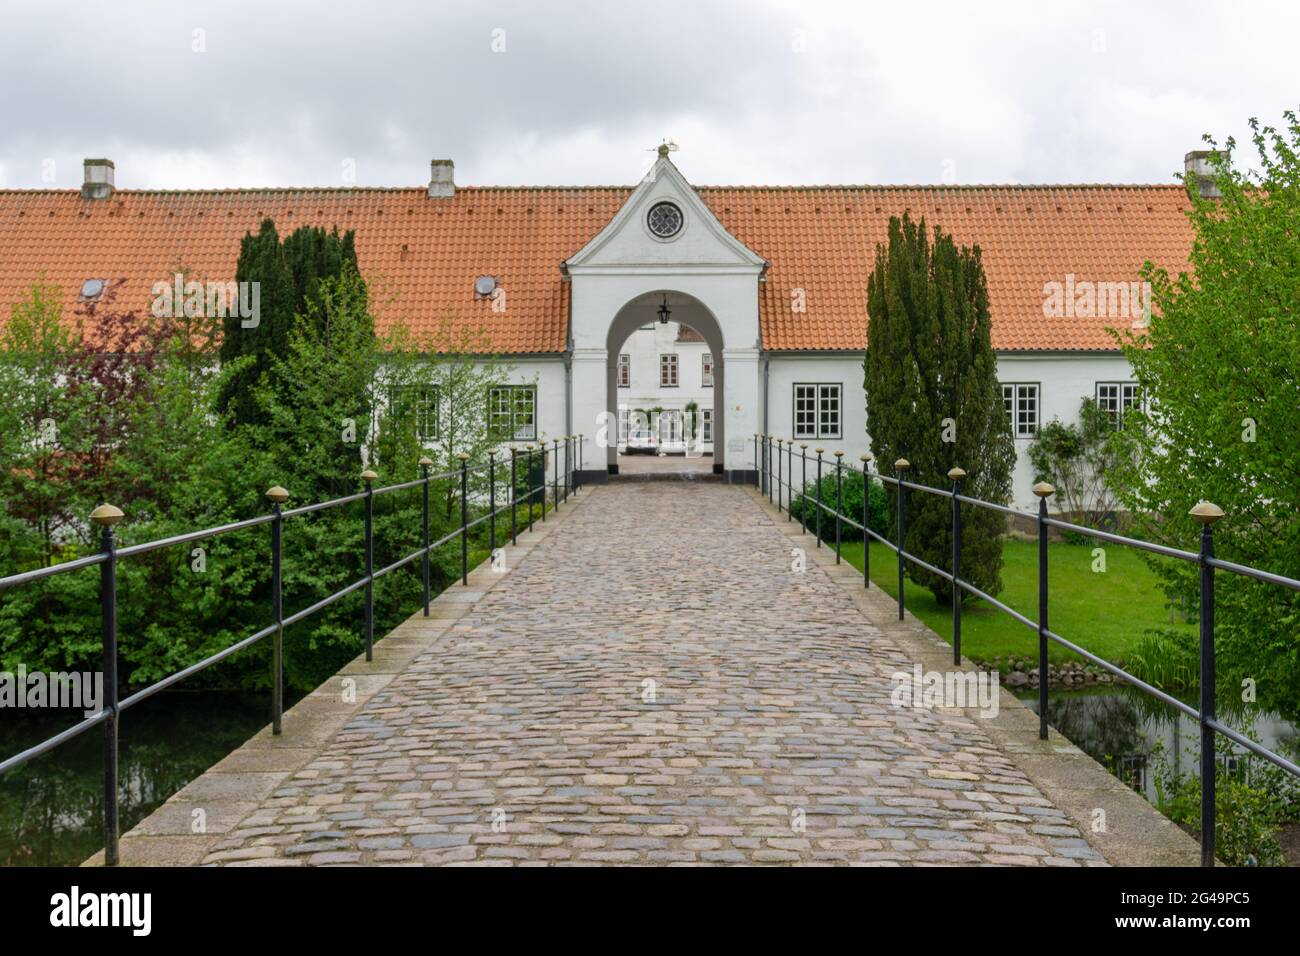 View of the bridge and gate leading into the courtyard of the Glucksburg castle Stock Photo